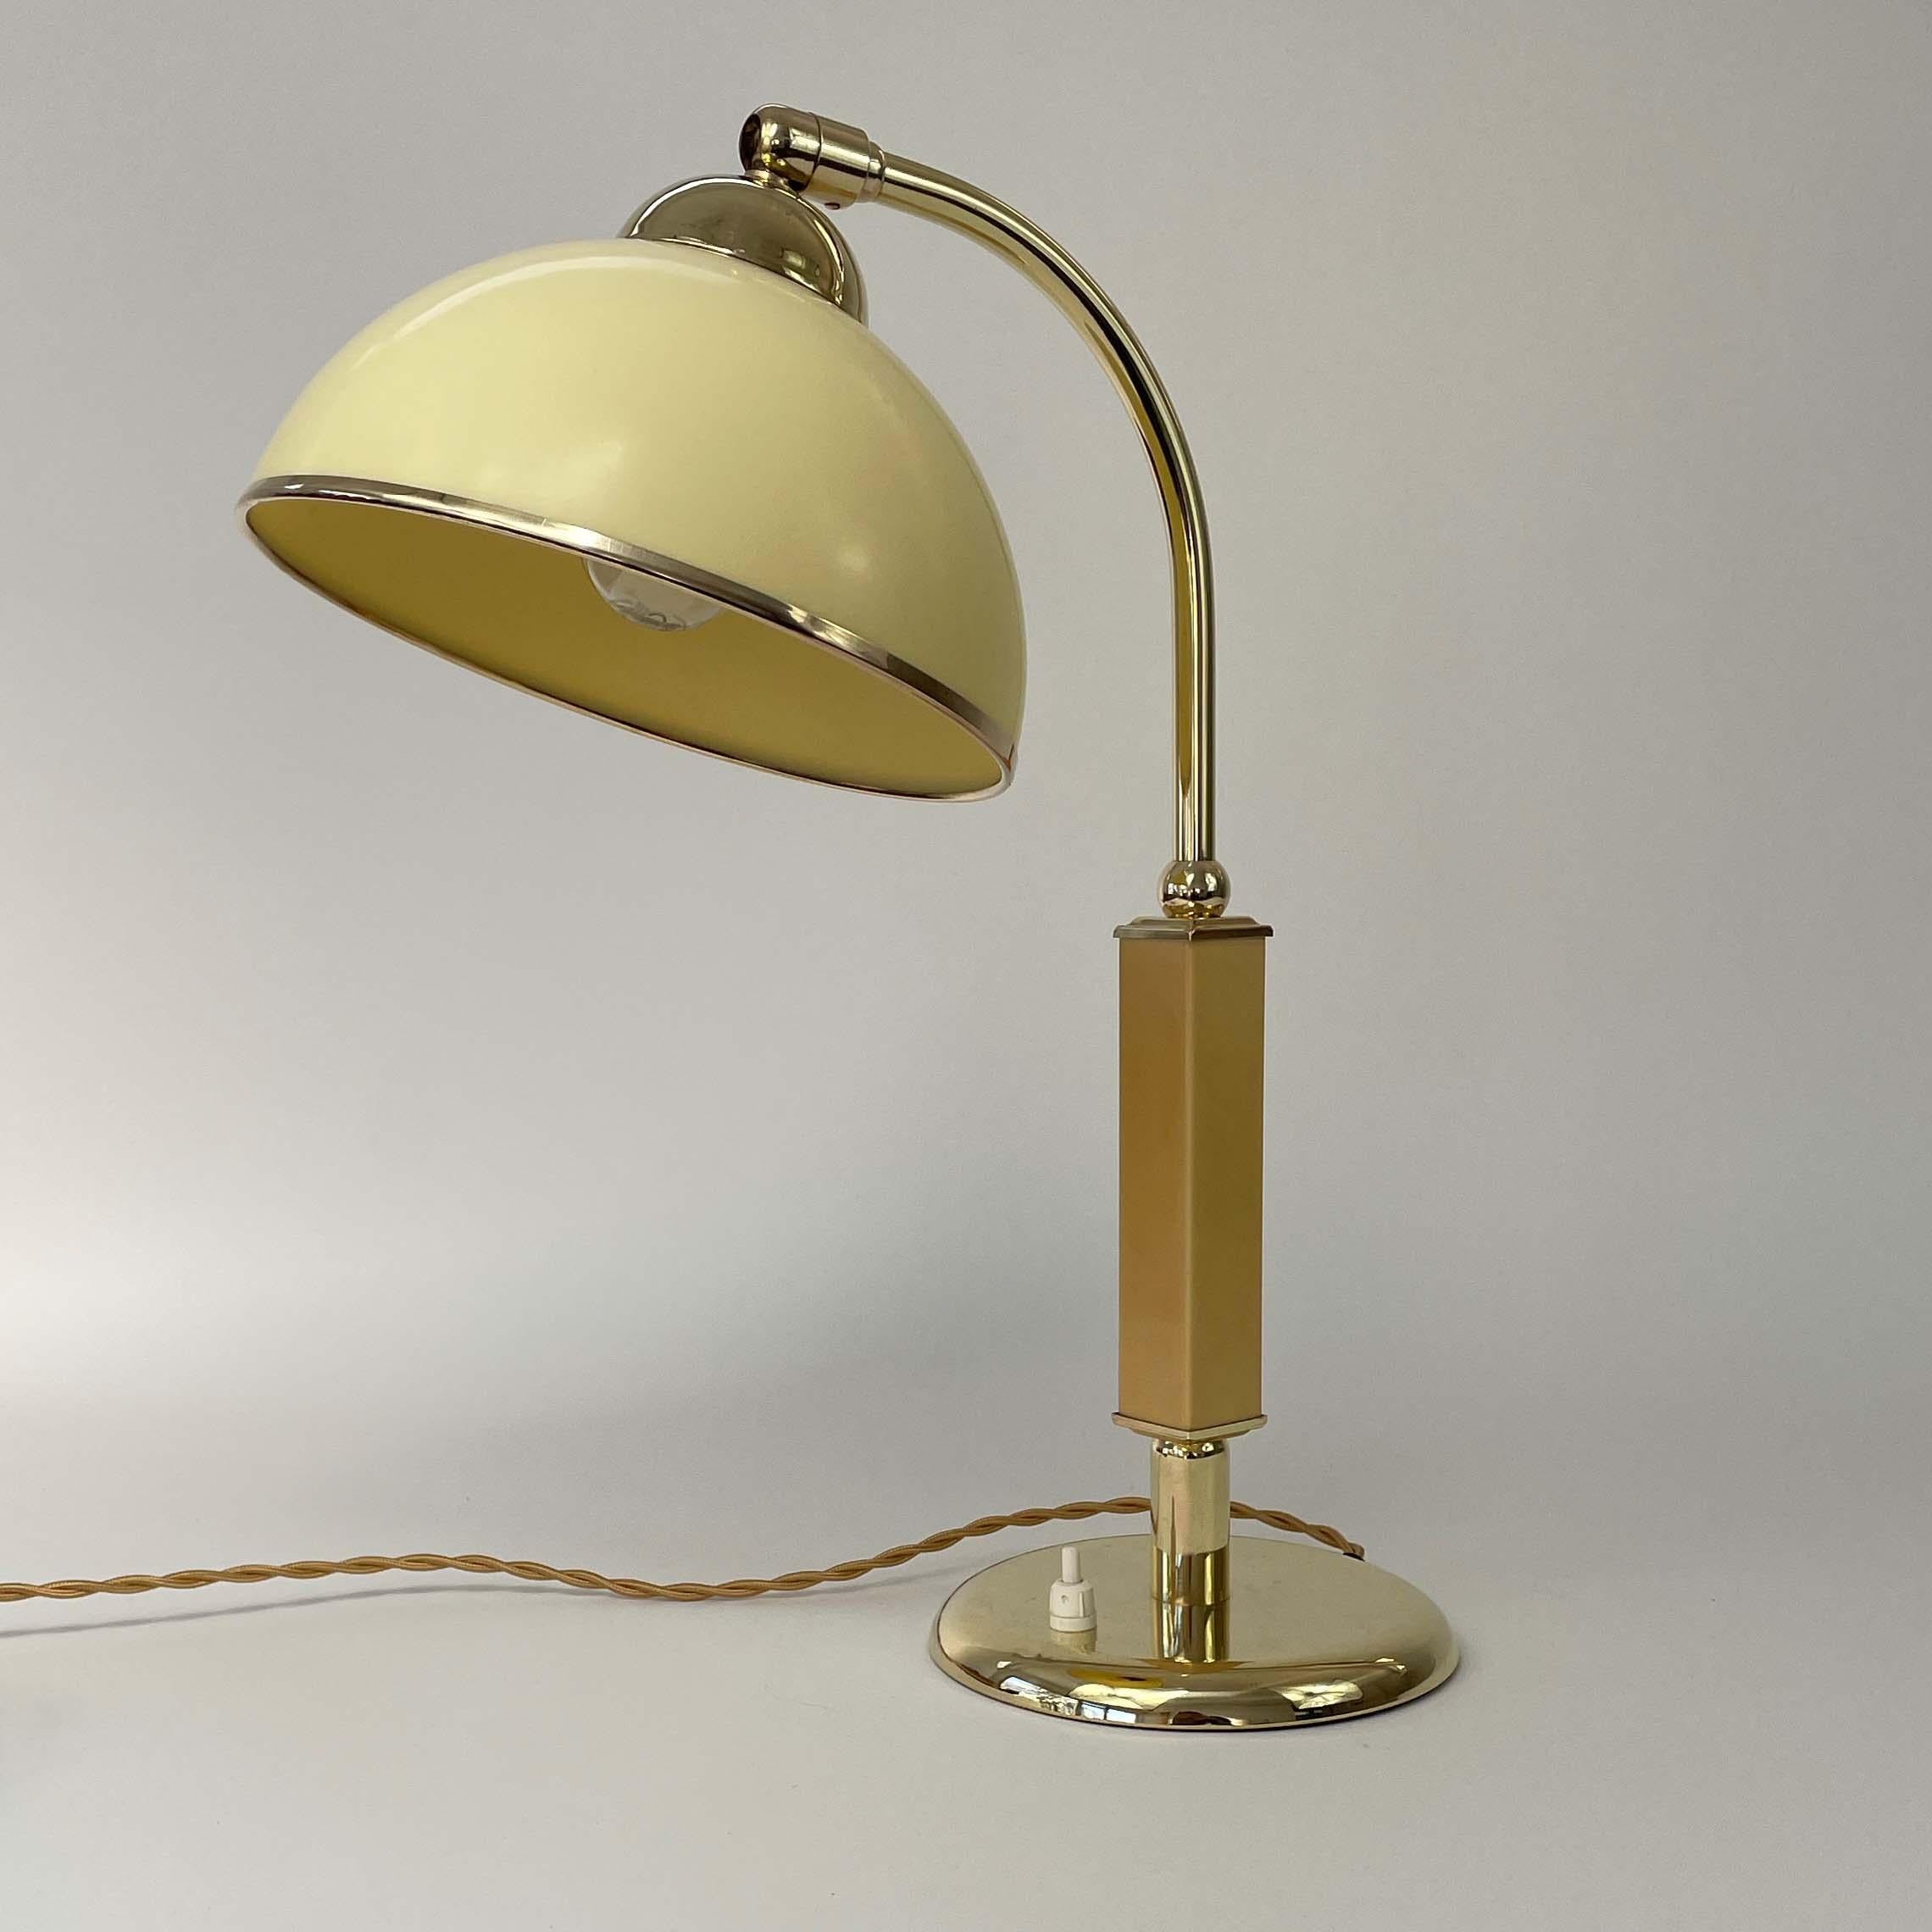 This unusual vintage table light was designed and manufactured in Germany in the 1930s during the Bauhaus period. It features a dome shaped dark cream colored bakelite lampshade, caramel / butterscotch colored lamp arm holder and brass hardware. The